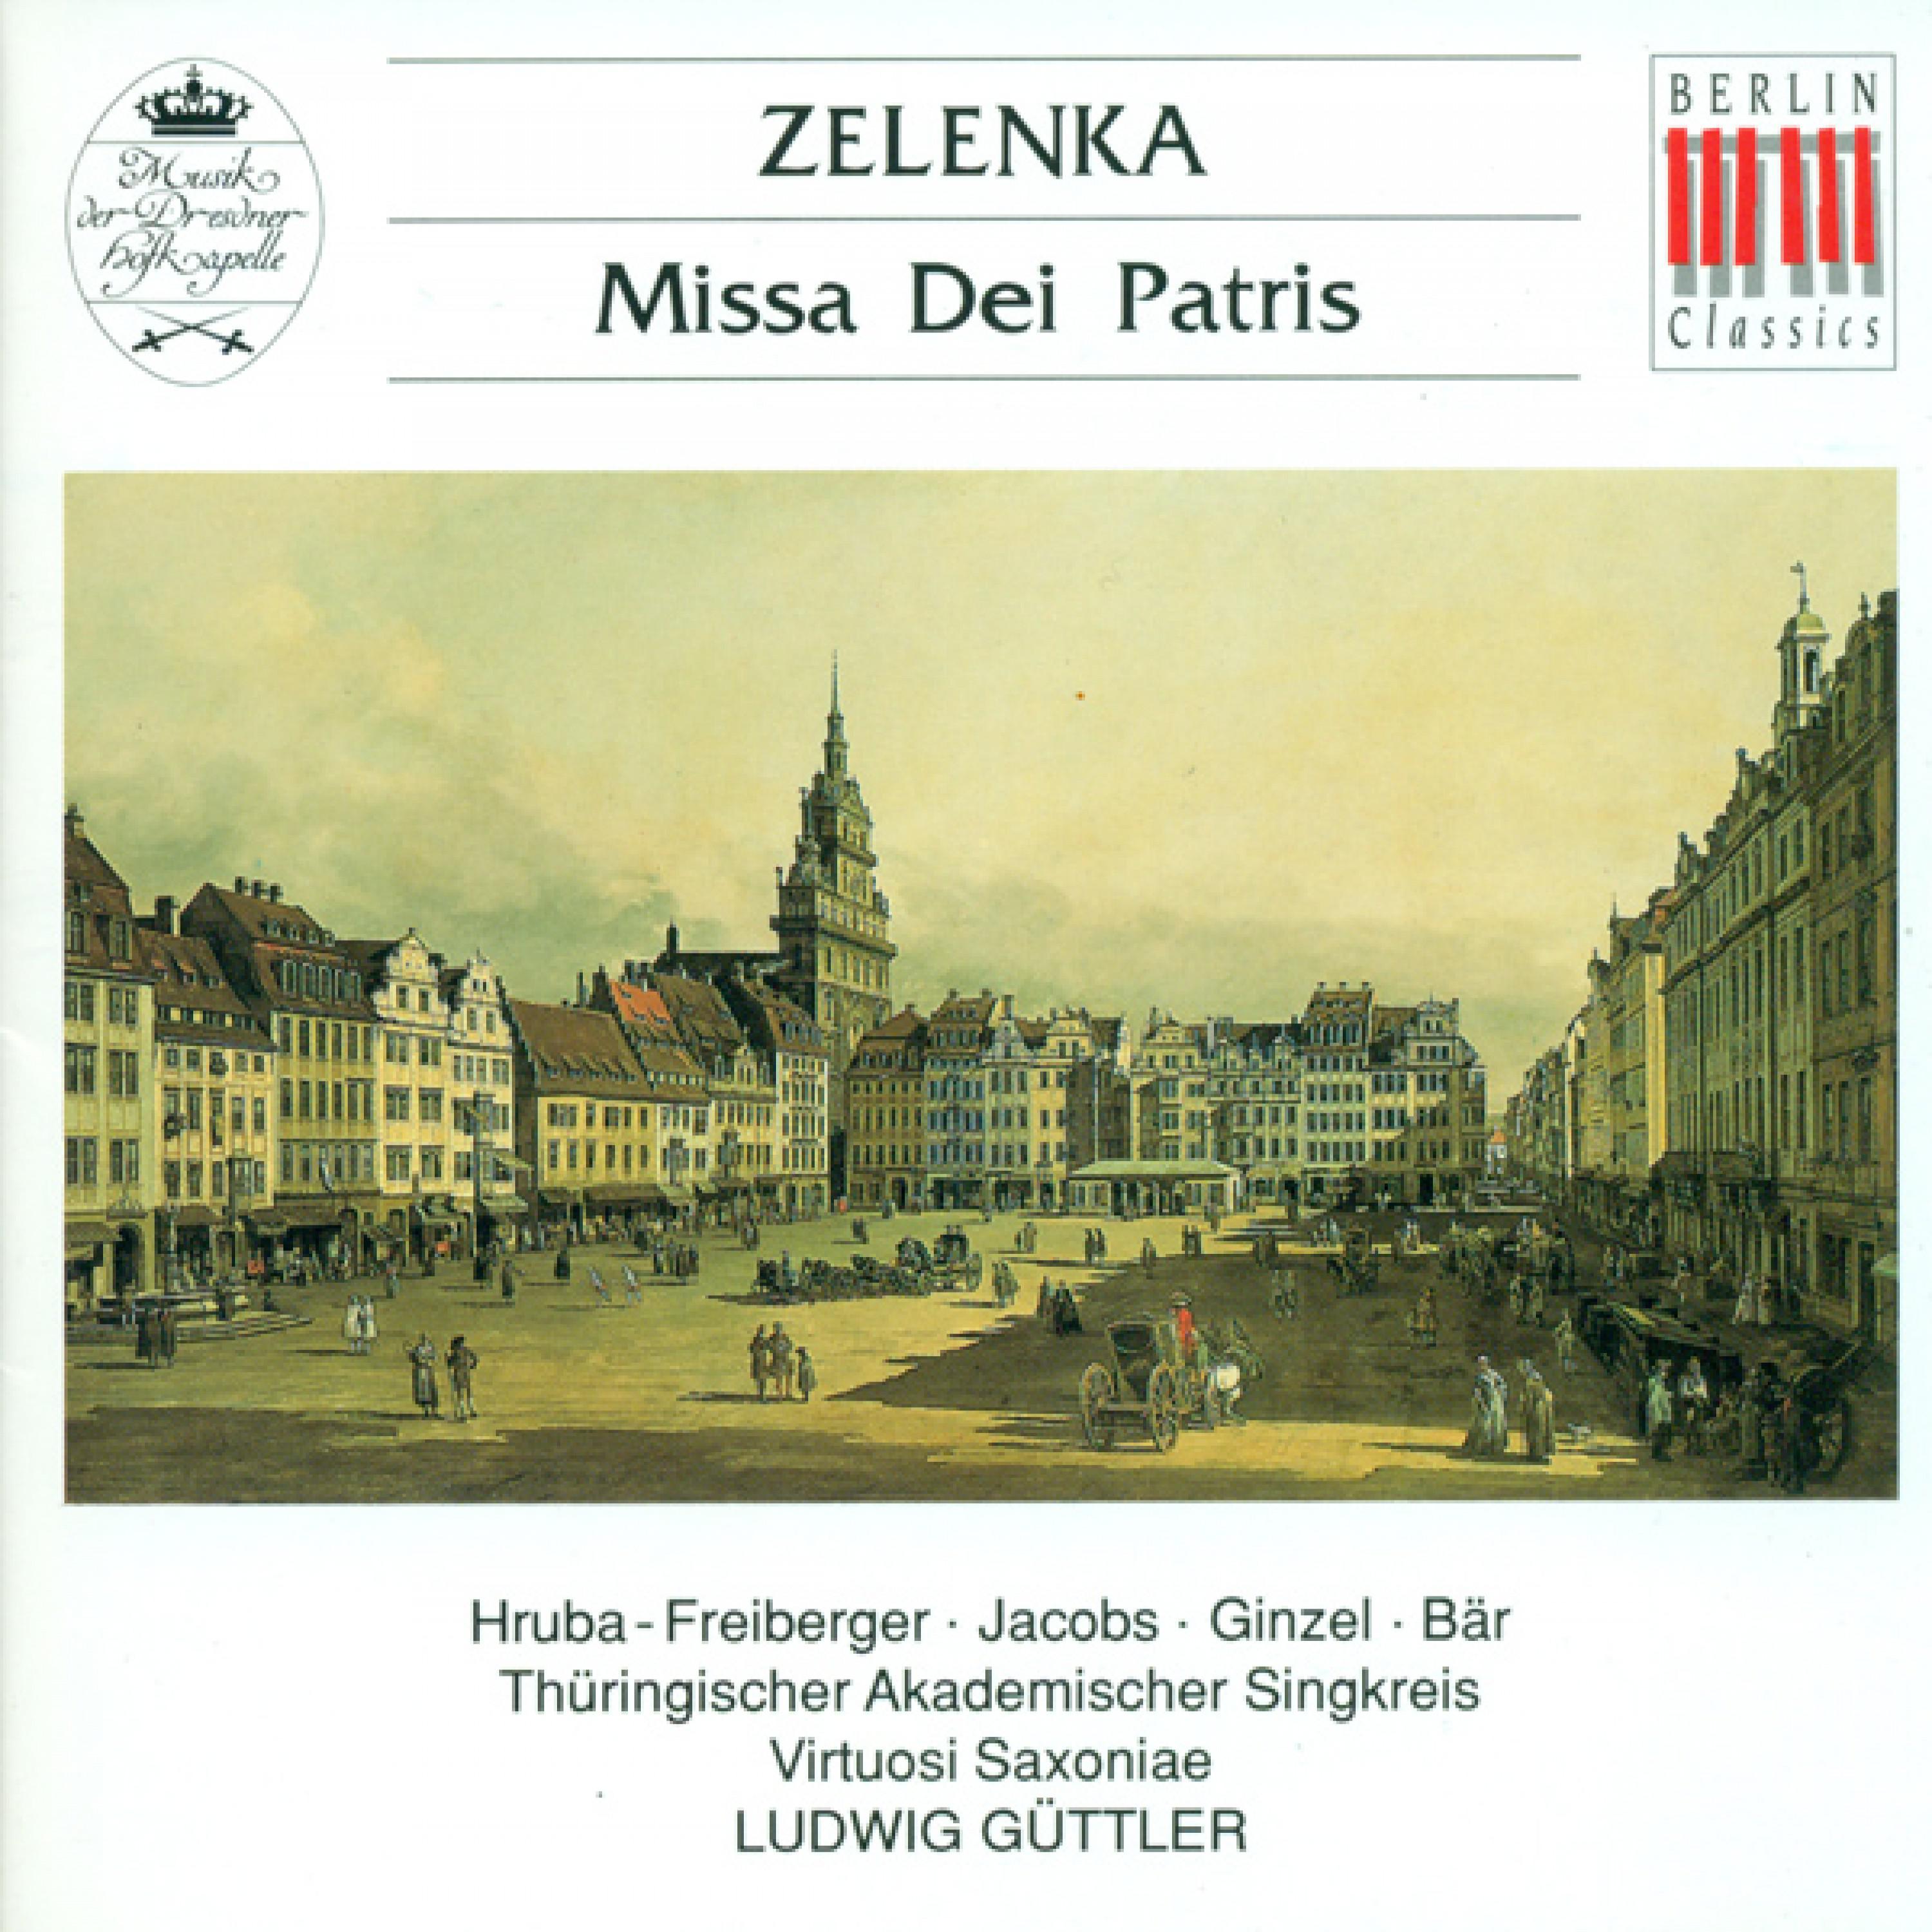 Missa Dei patris in C Major, ZWV 19: IV. Gloria in excelsis Deo